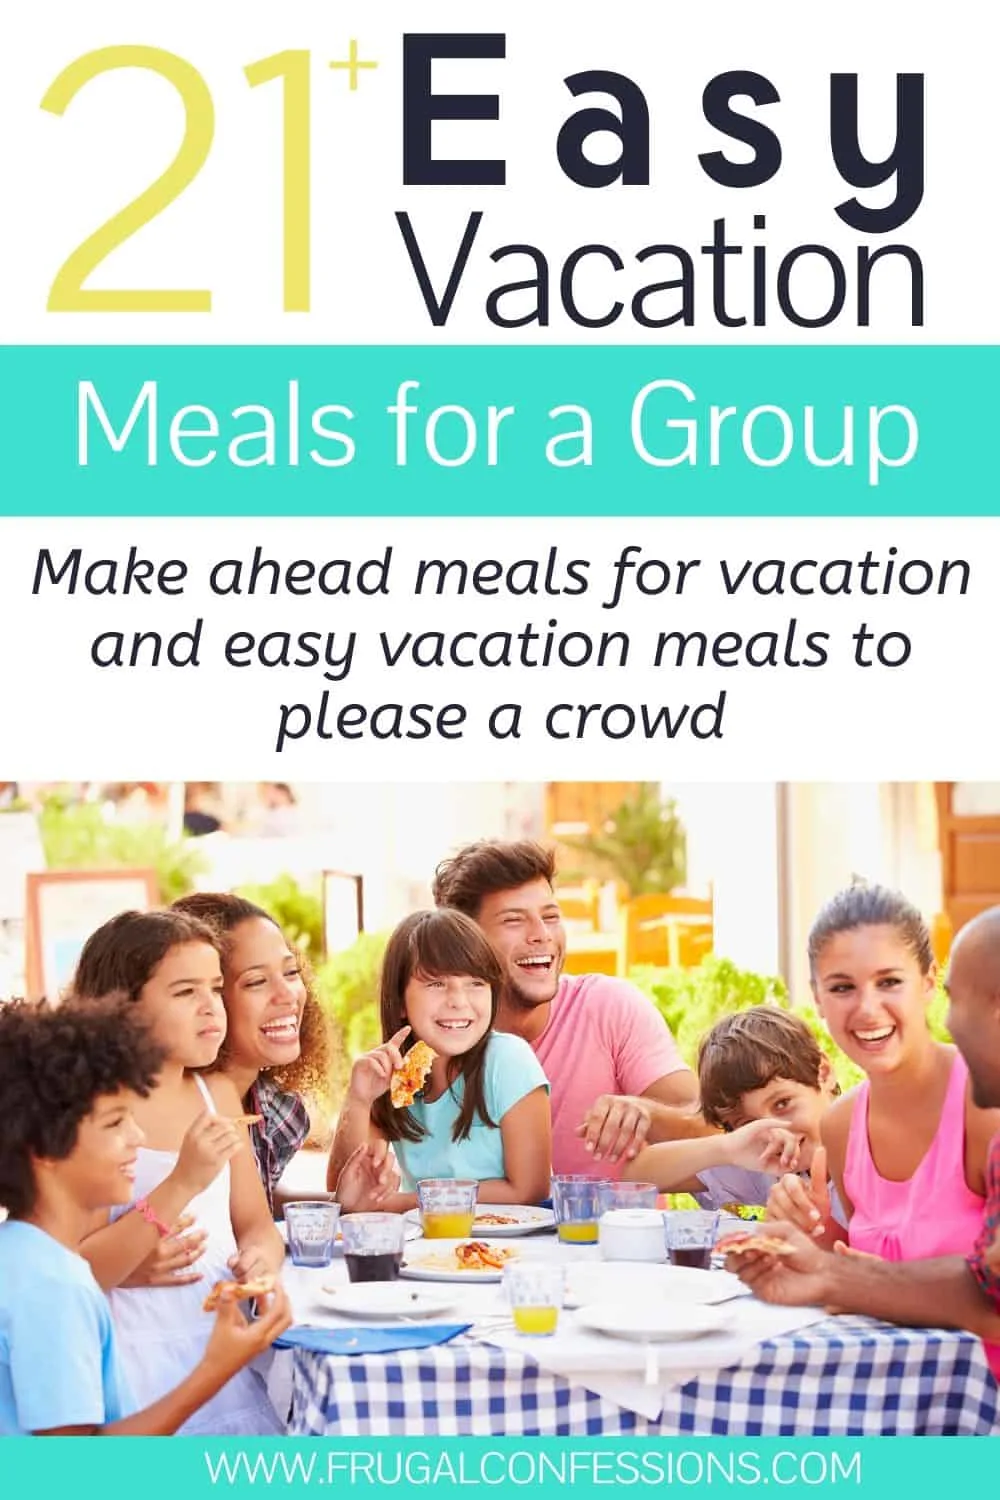 multi families eating vacation meals together, text overlay "21 easy vacation meals for a group"